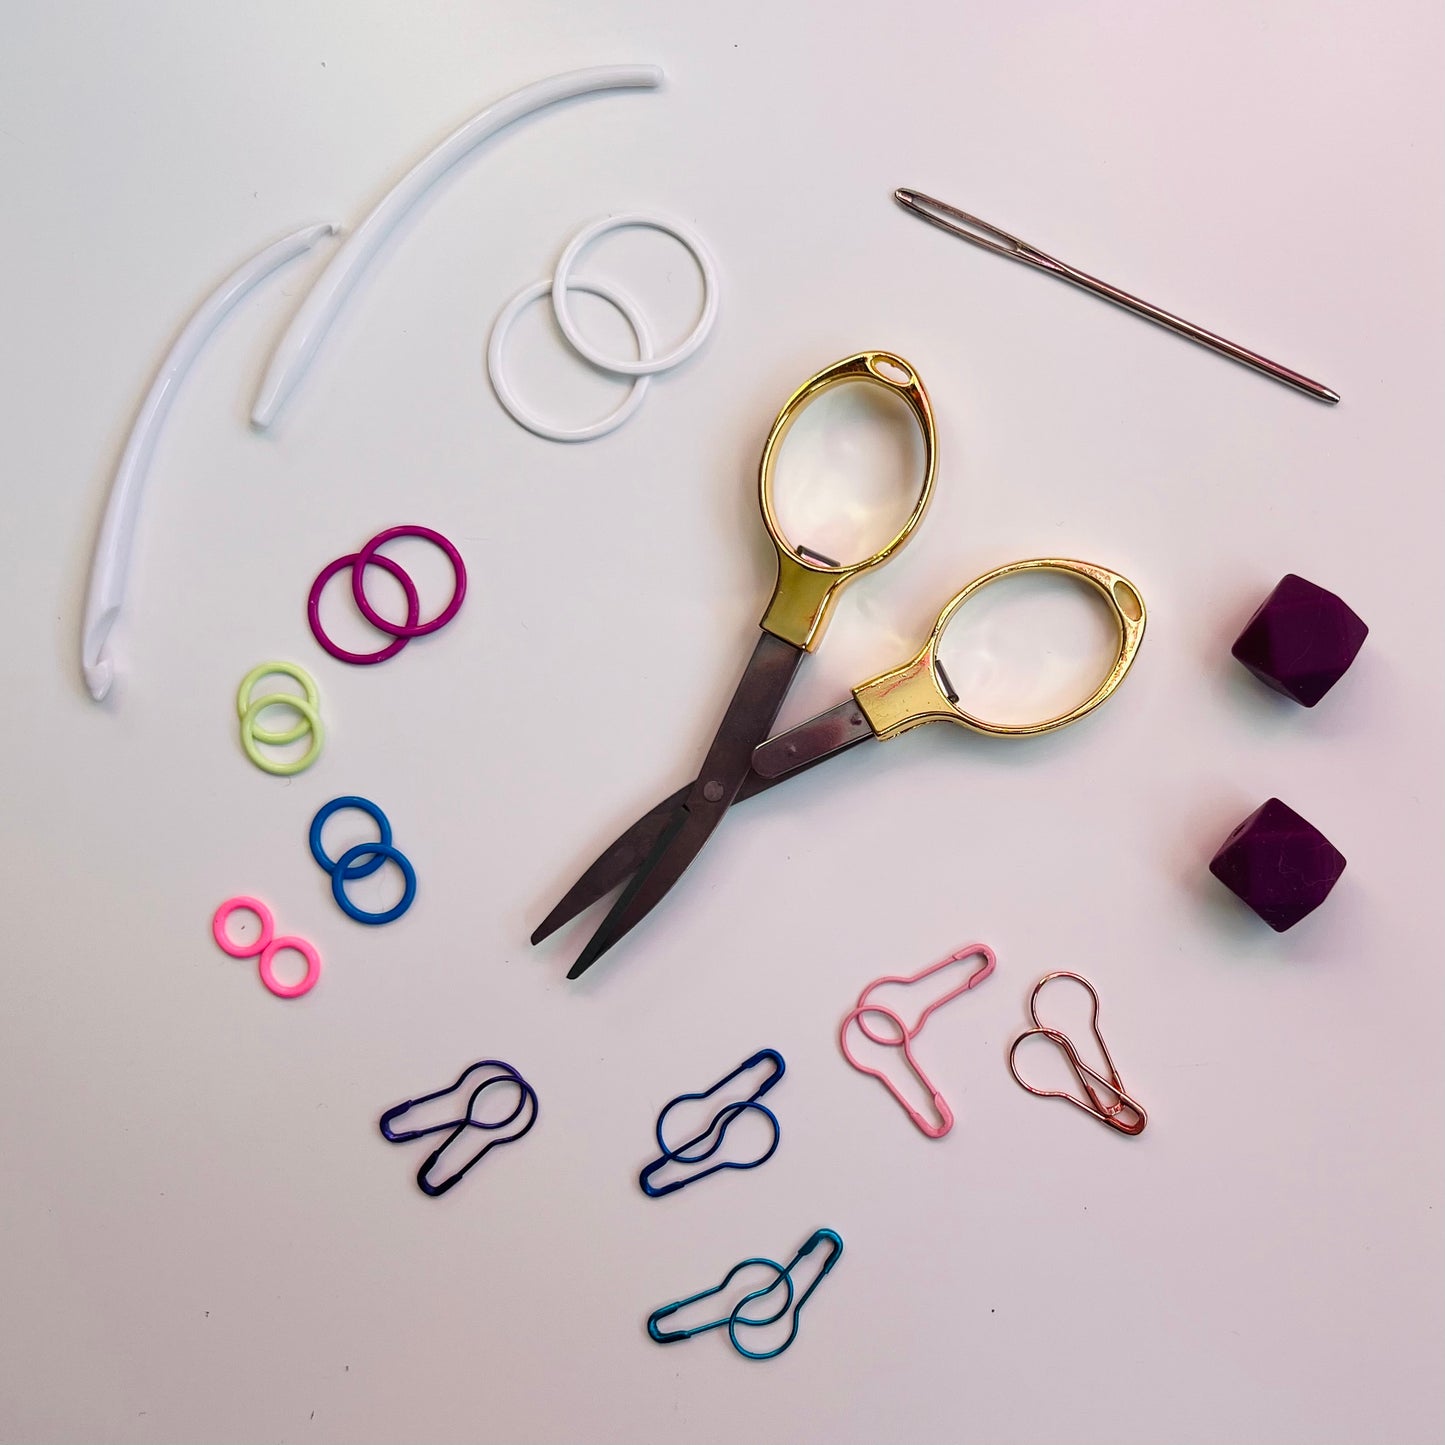 The Knit & Crochet Kit - Replacement Accessory Pack - with scissors